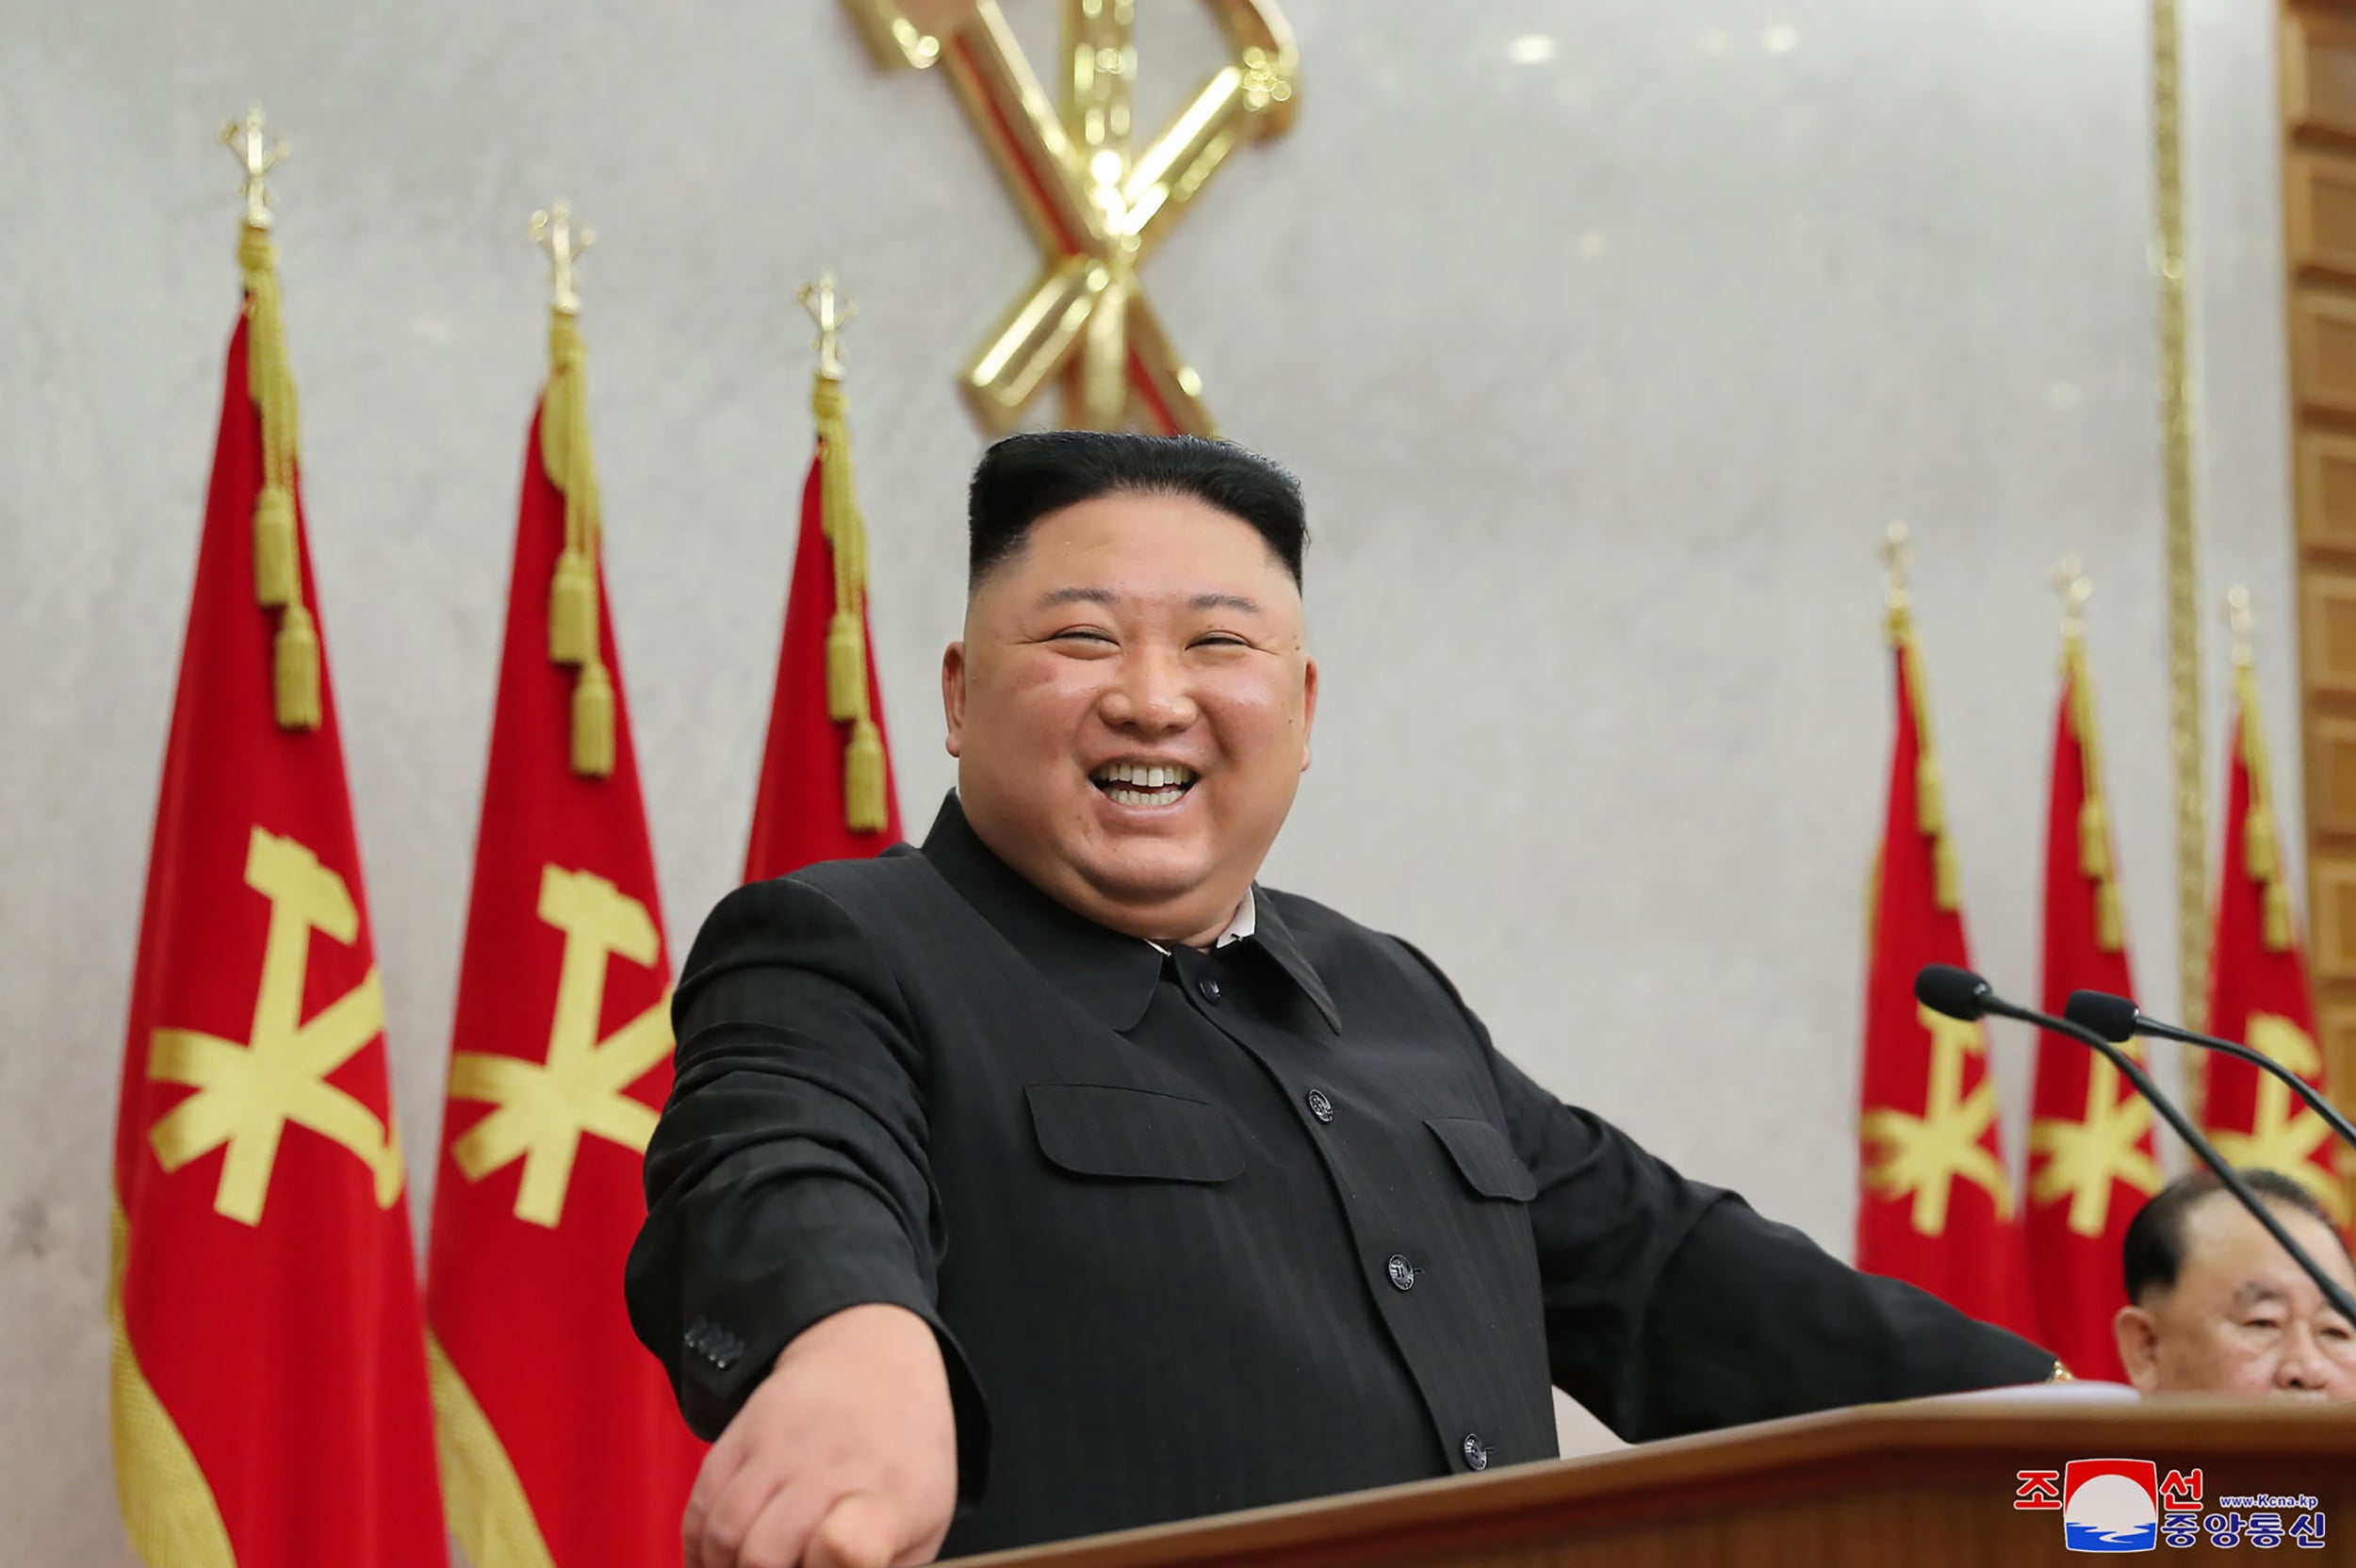 Kim Jong Un attending the 2nd plenary meeting of the 8th Central Committee of the Workers' Party of Korea (WPK) in North Korea